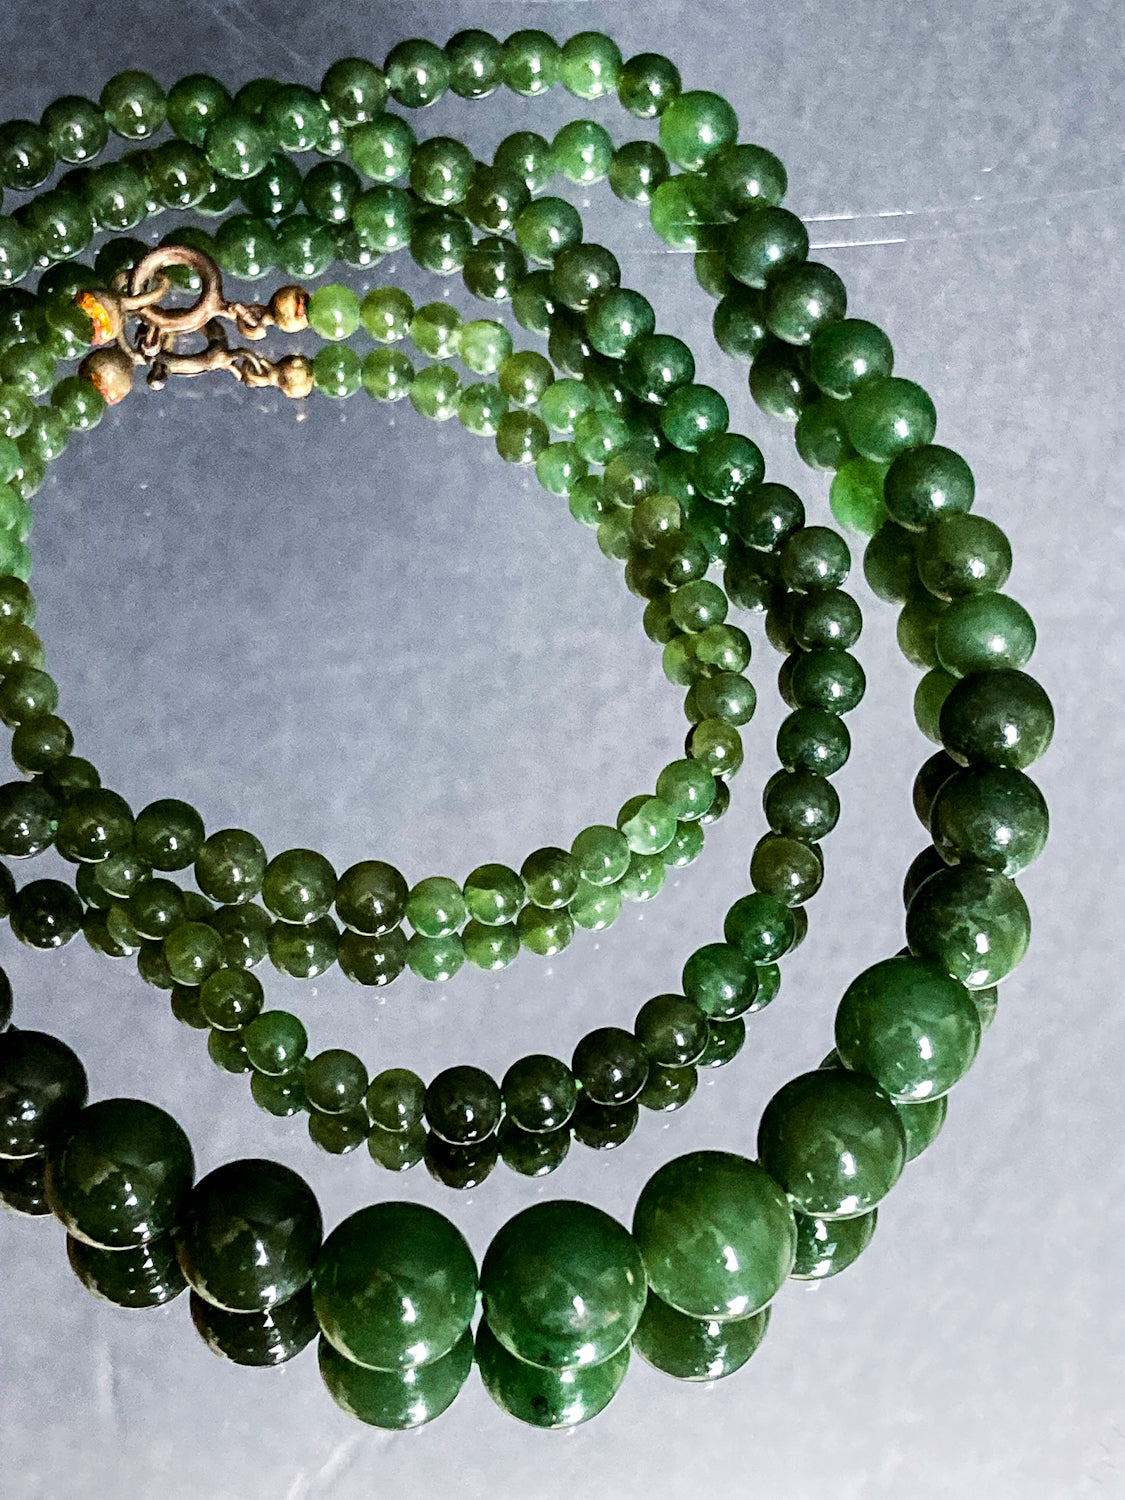 Vintage Graduated Green Nephrite Stone Bead Elongated Necklace on mirror